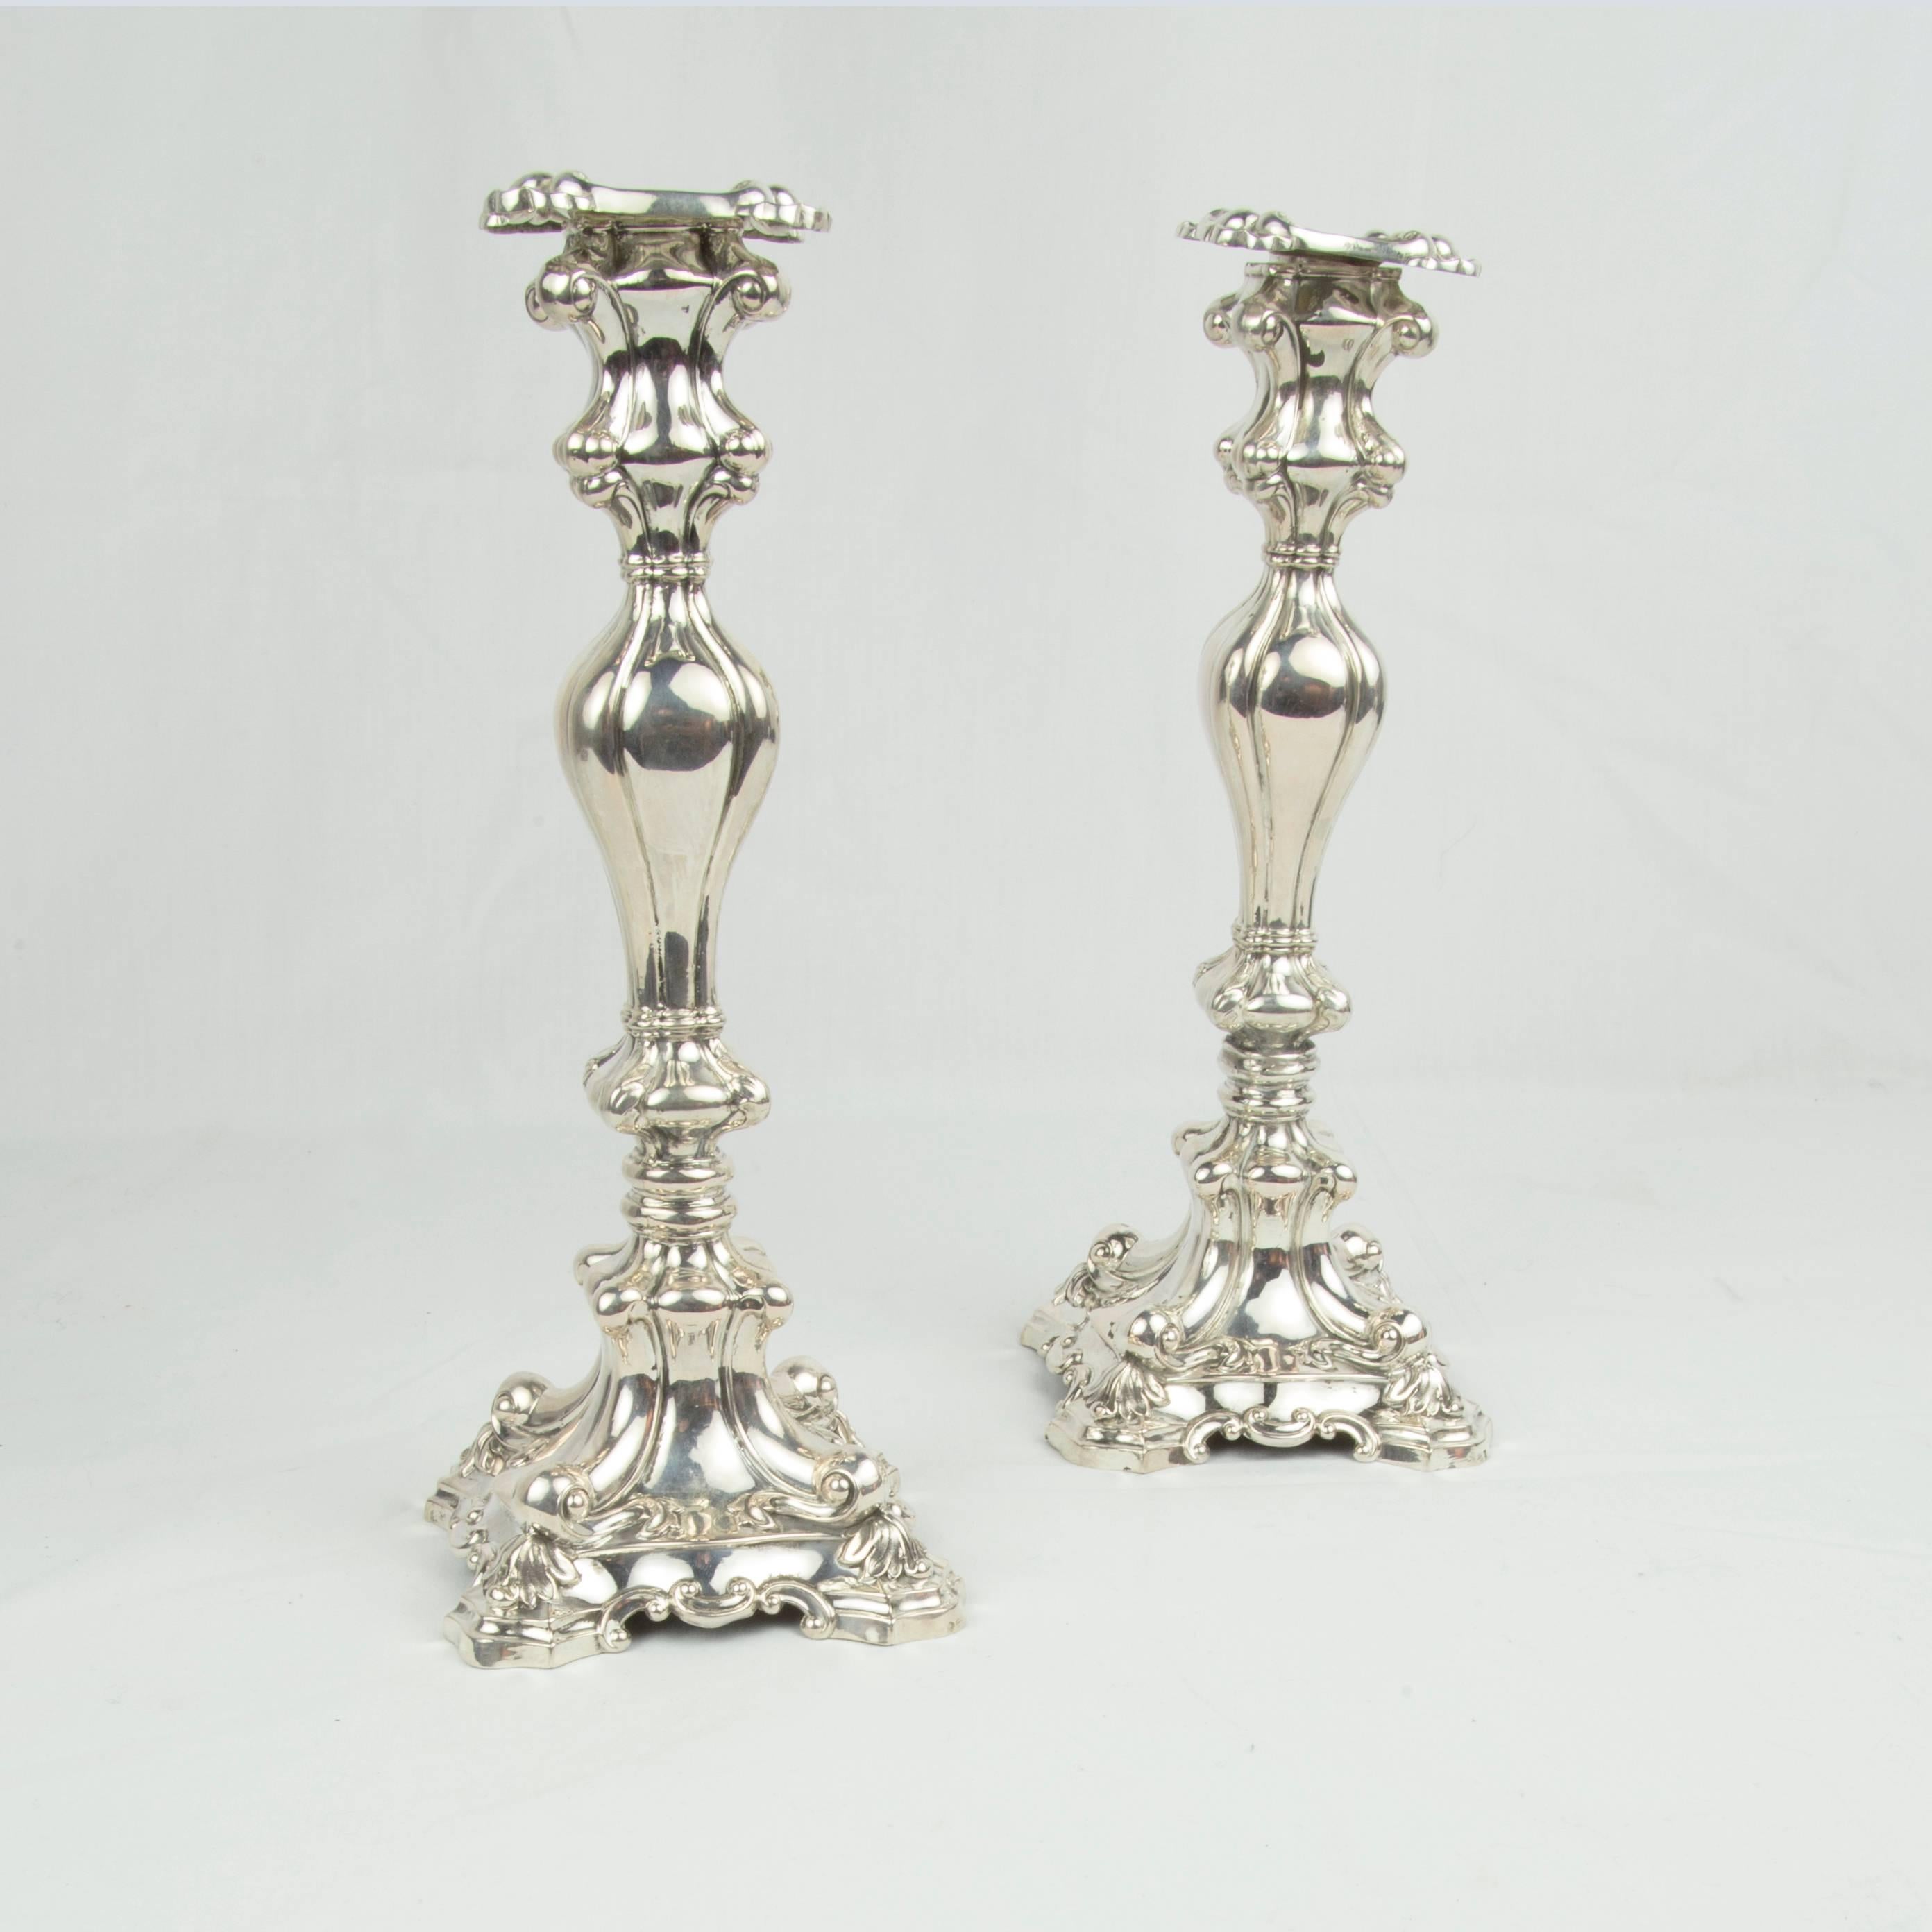 Pair of elegant French Louis XV style silver candlesticks; hallmarked for Orly.